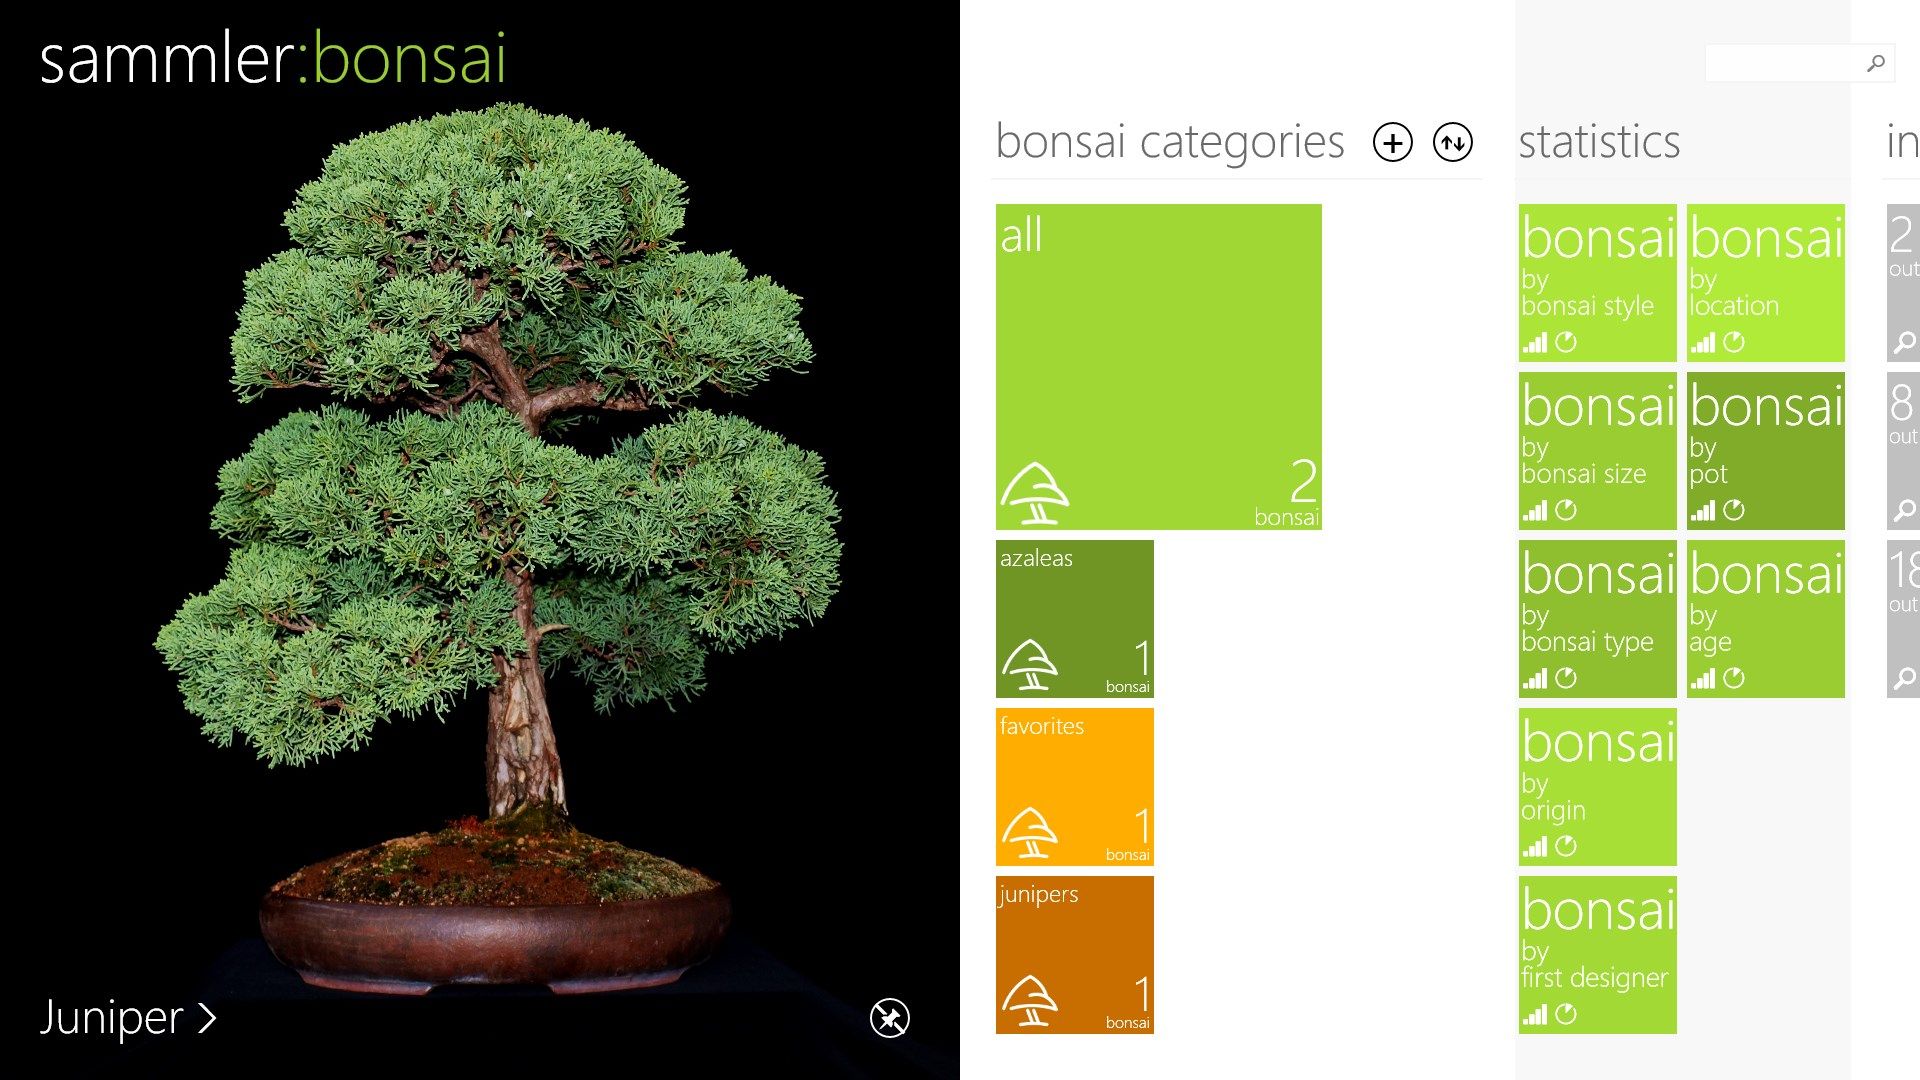 Homepage with user-defined bonsai categories and information about the collection